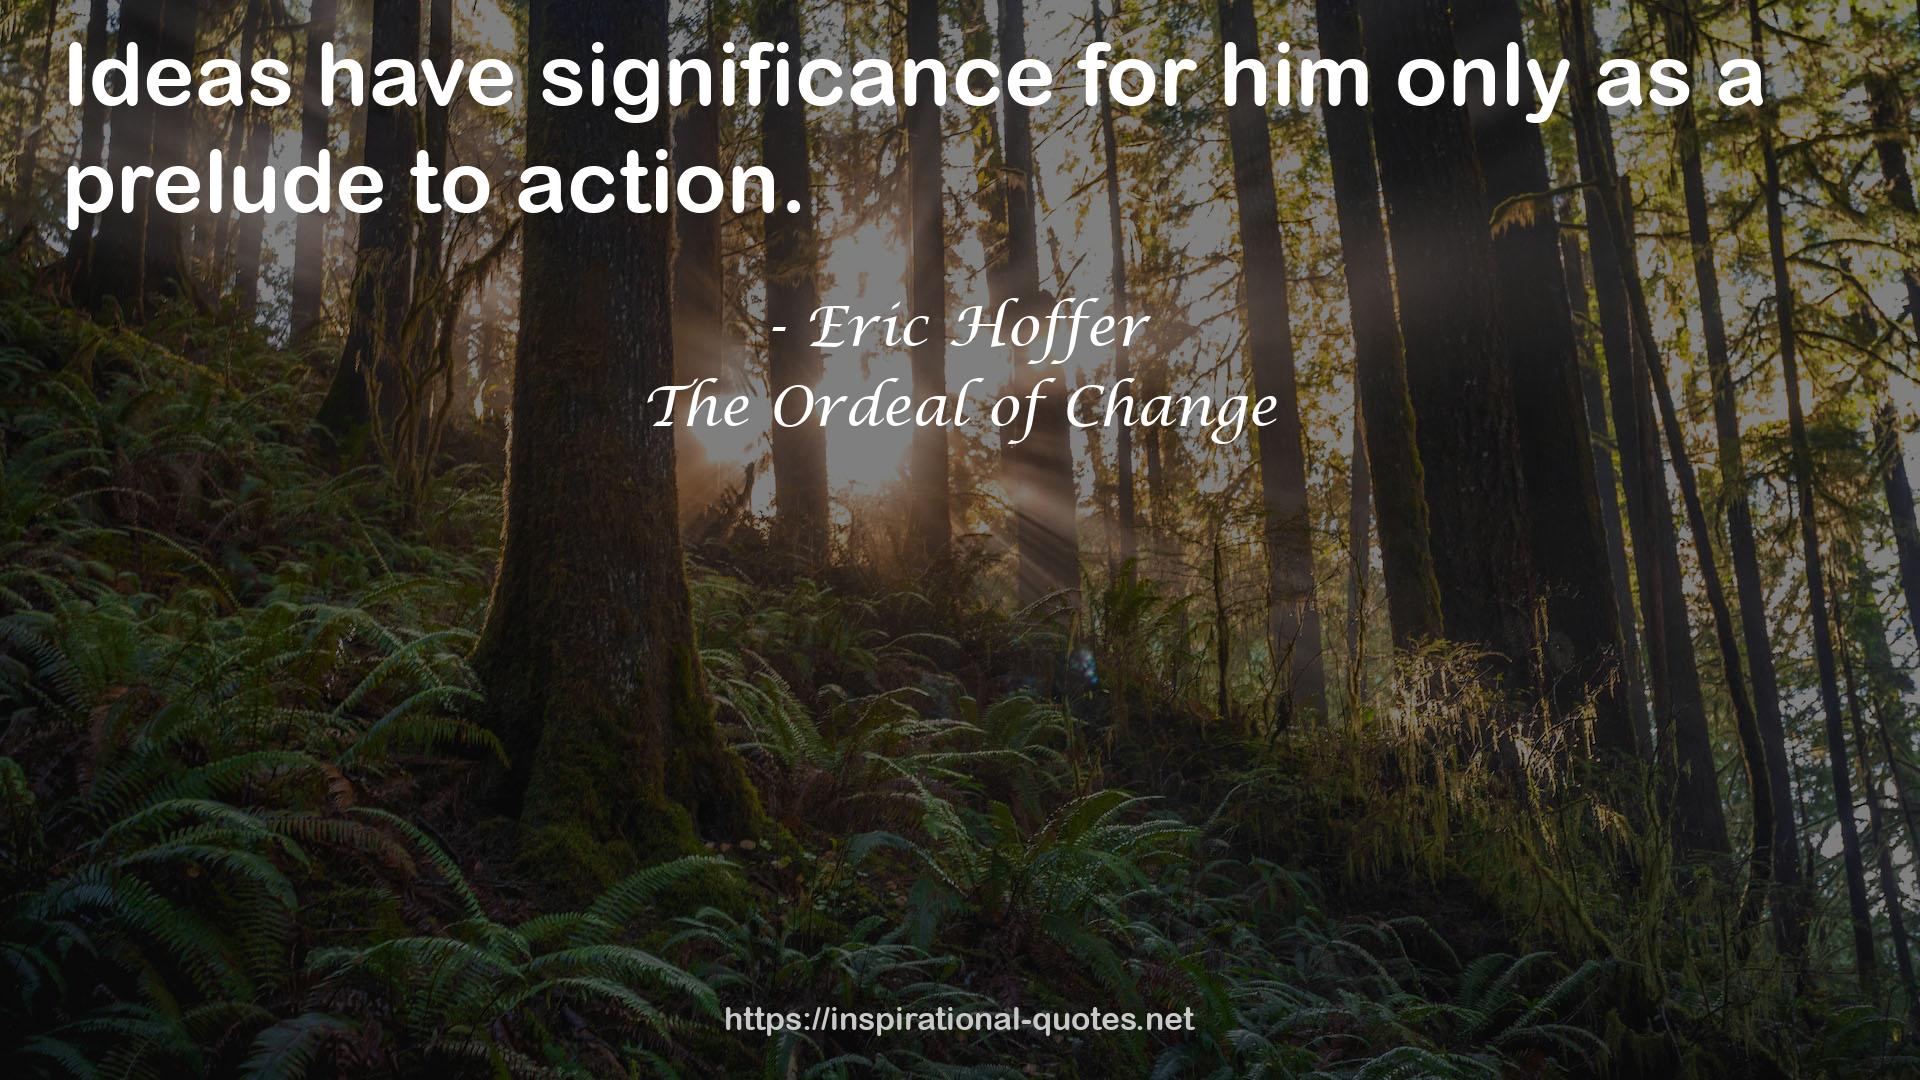 The Ordeal of Change QUOTES